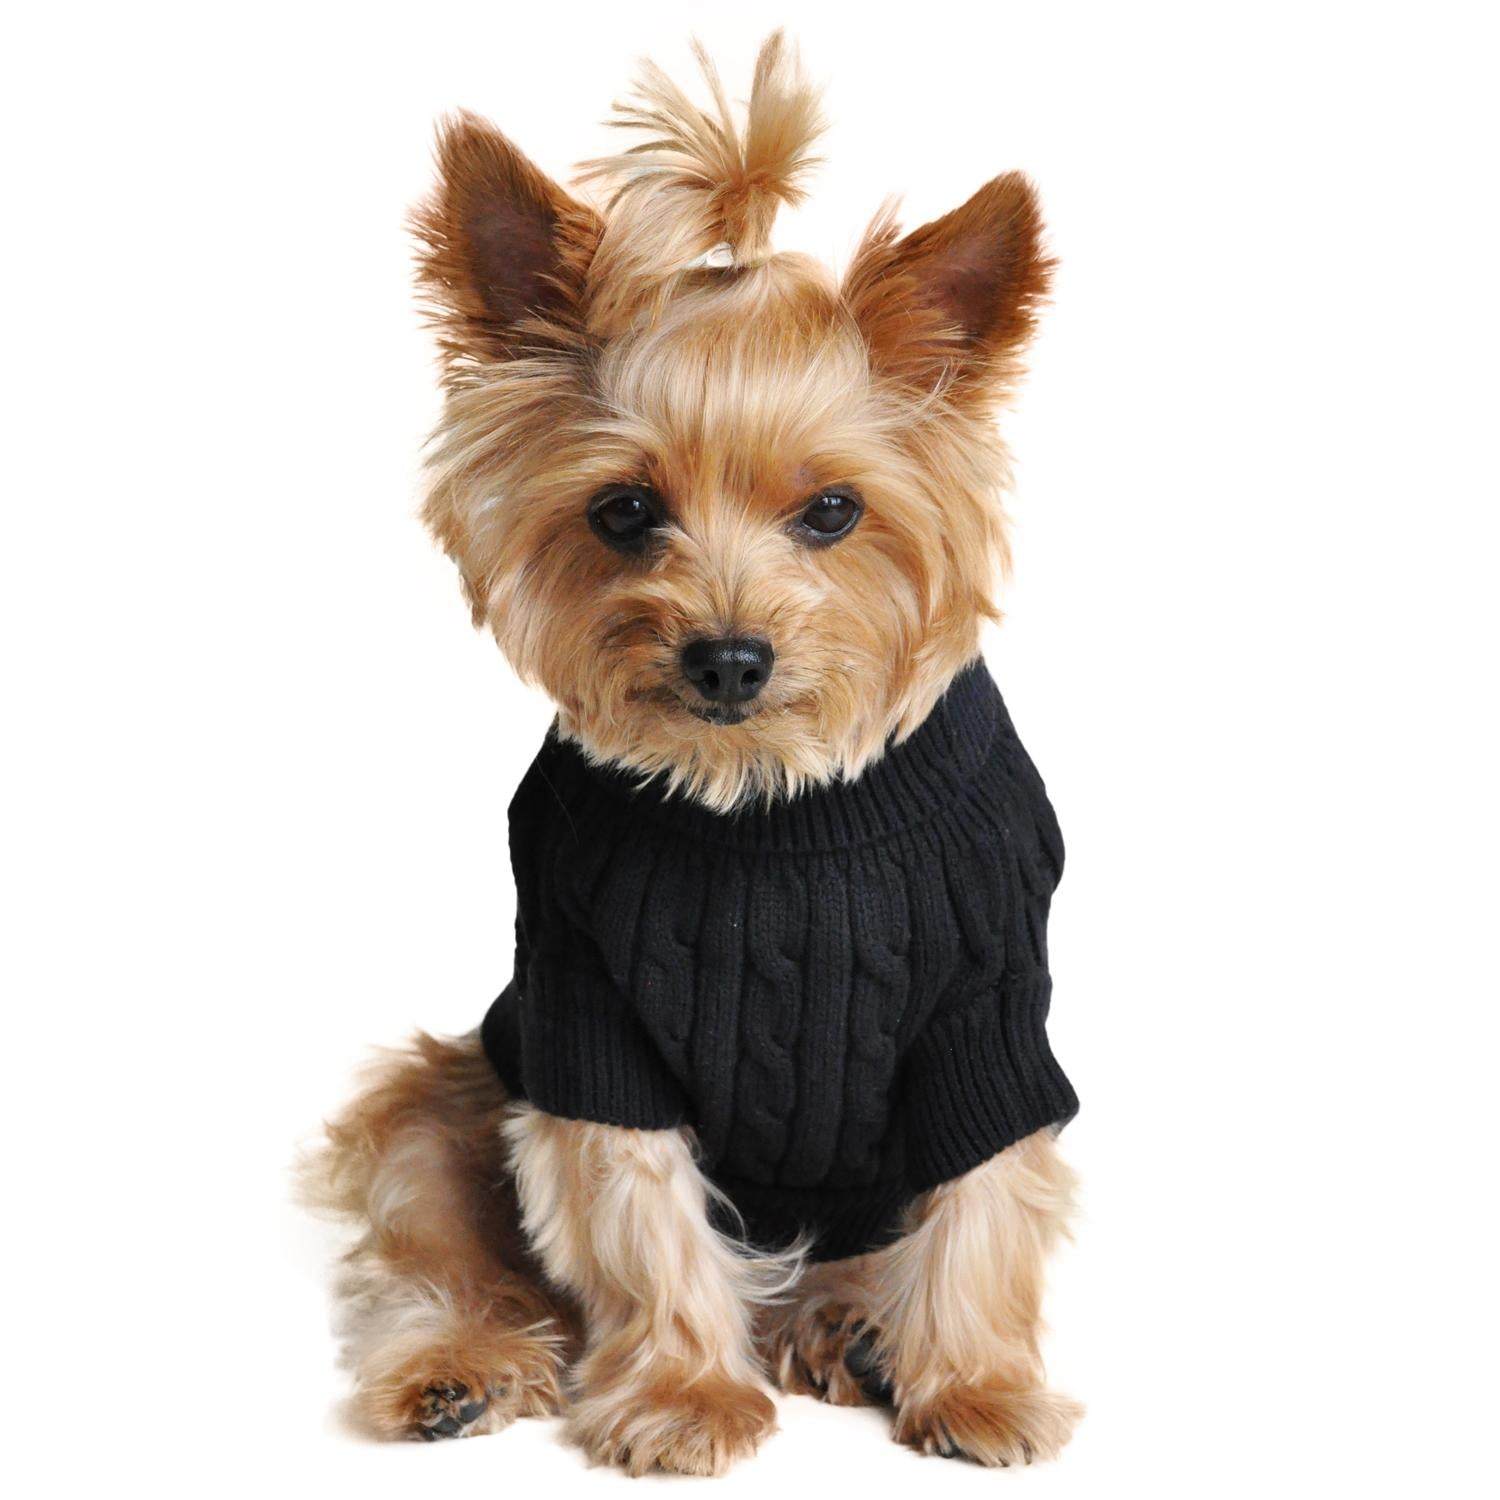 combed-cotton-cable-knit-dog-sweater-jet-black-4903.jpg